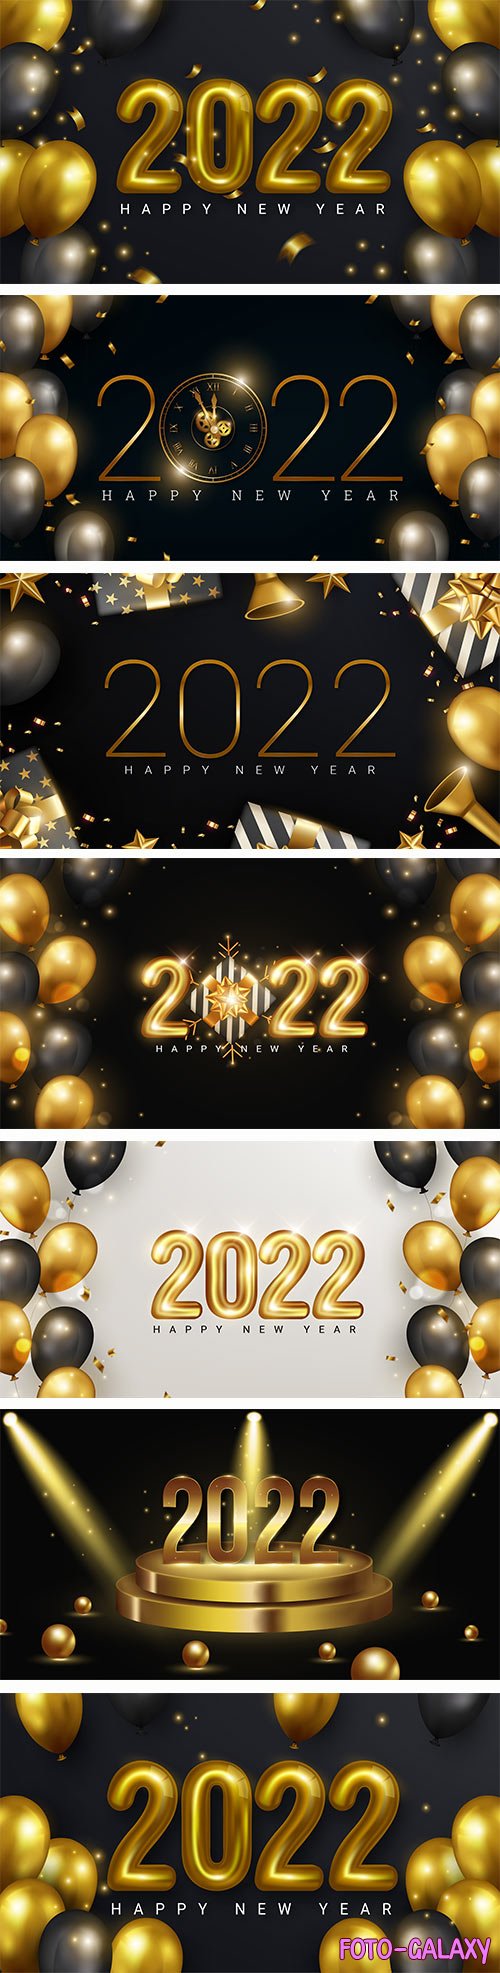 2022 number made by sparkle lights with golden balloons and stars for happy new year concept